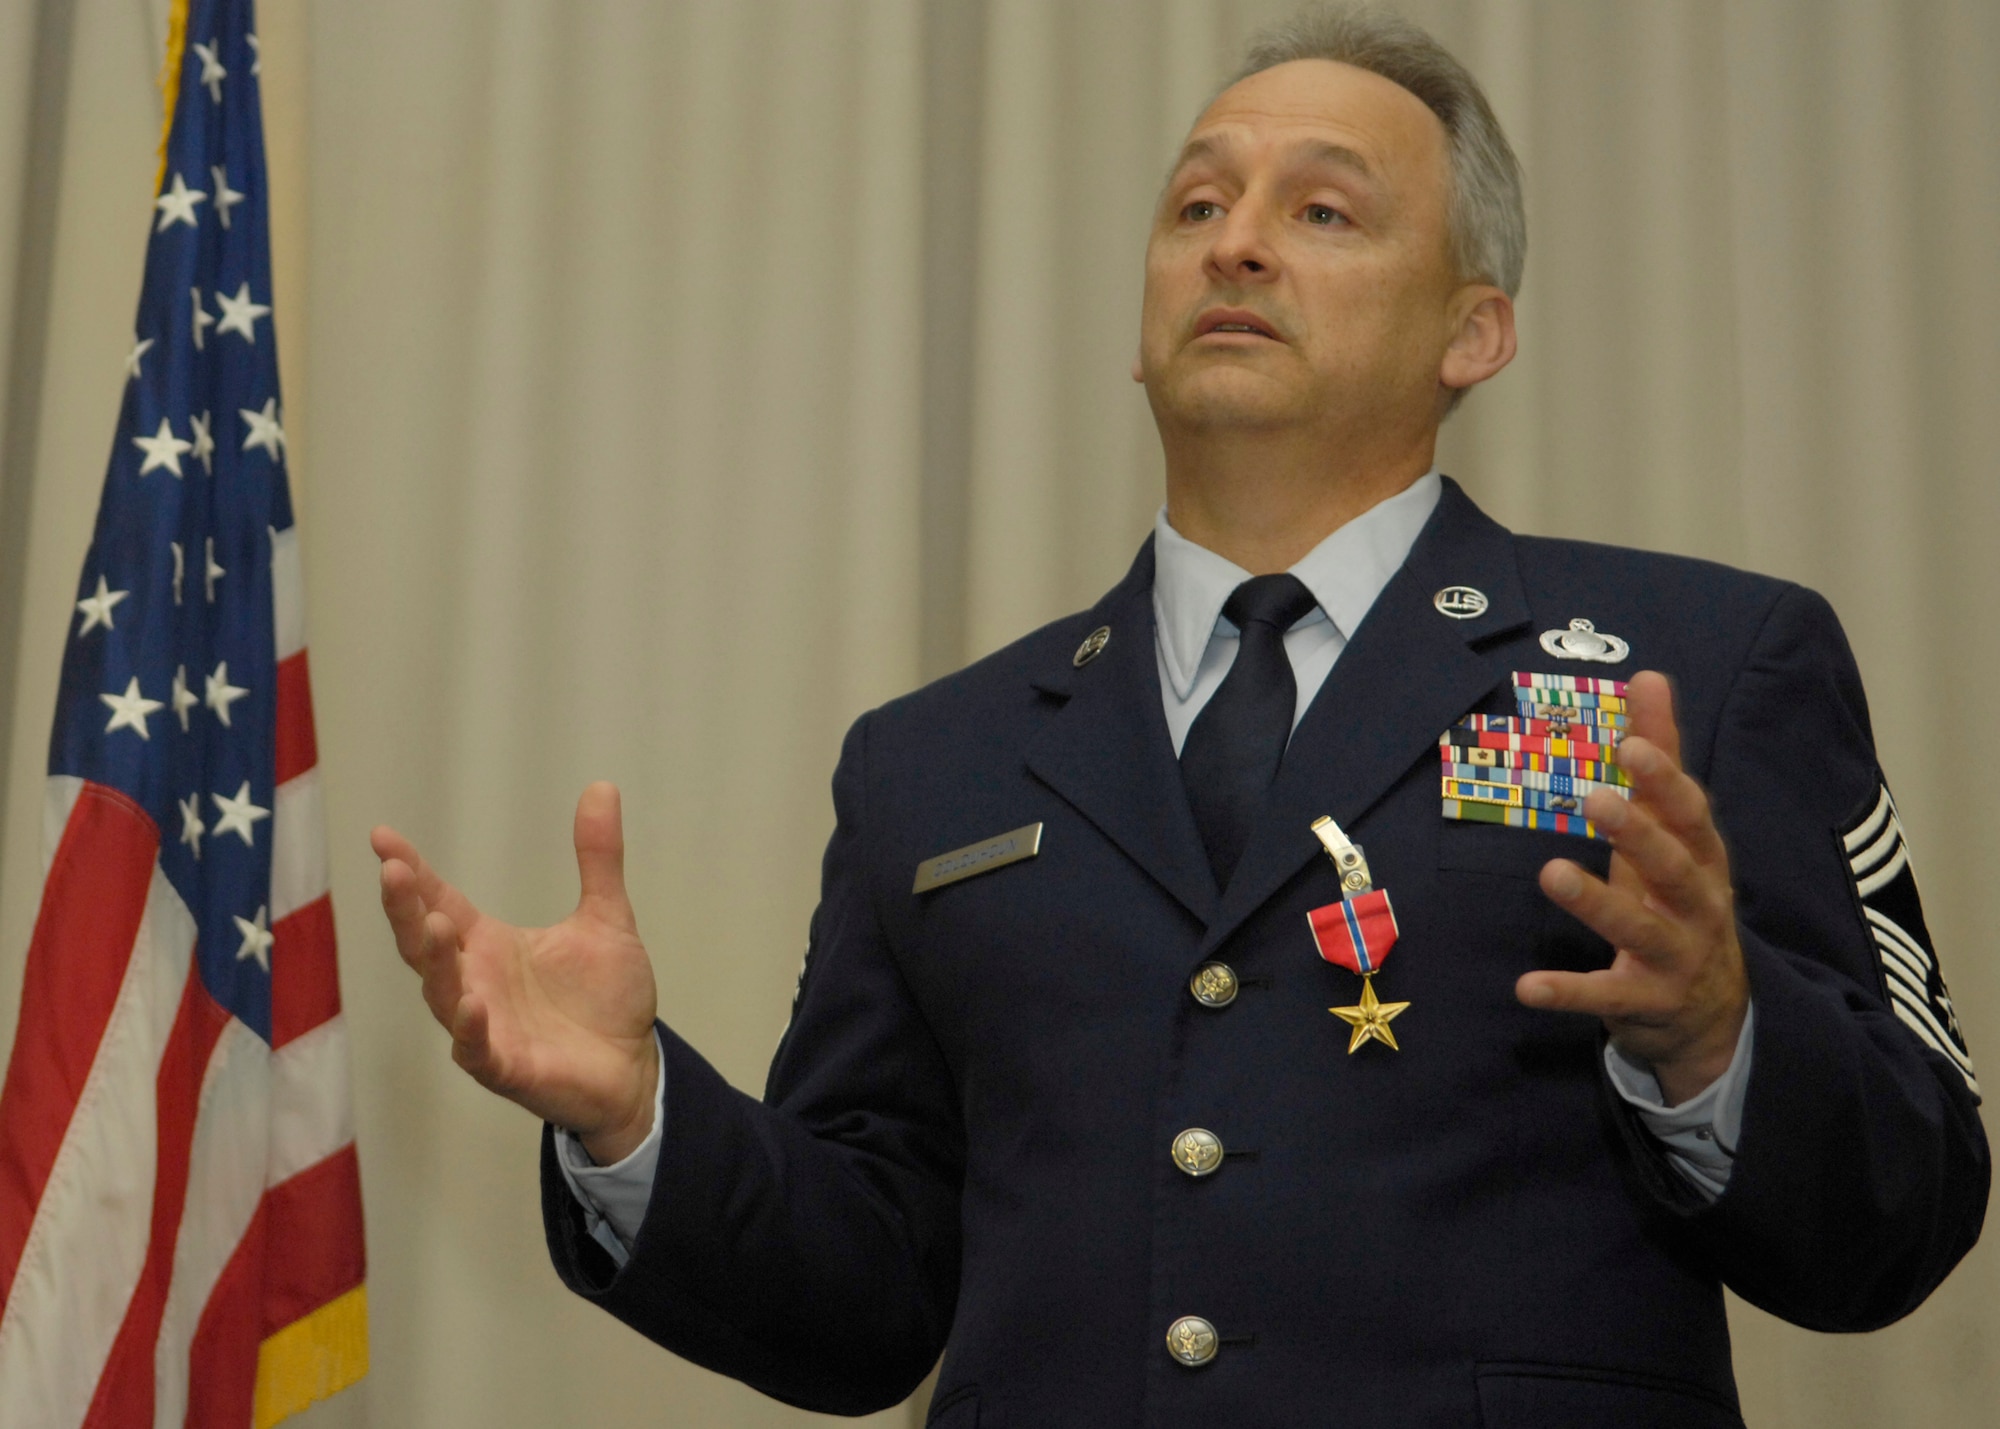 VANDENBERG AIR FORCE BASE, Calif. -- Retired Chief Master Sgt. Edward Colquhoun gives a speech after he received the Bronze Star Medal here March 3. The Bronze Star Medal is awarded for acts of bravery, merit and meritorious service.(U.S. Air Force photo/Airman 1st Class Andrew Lee) 
 